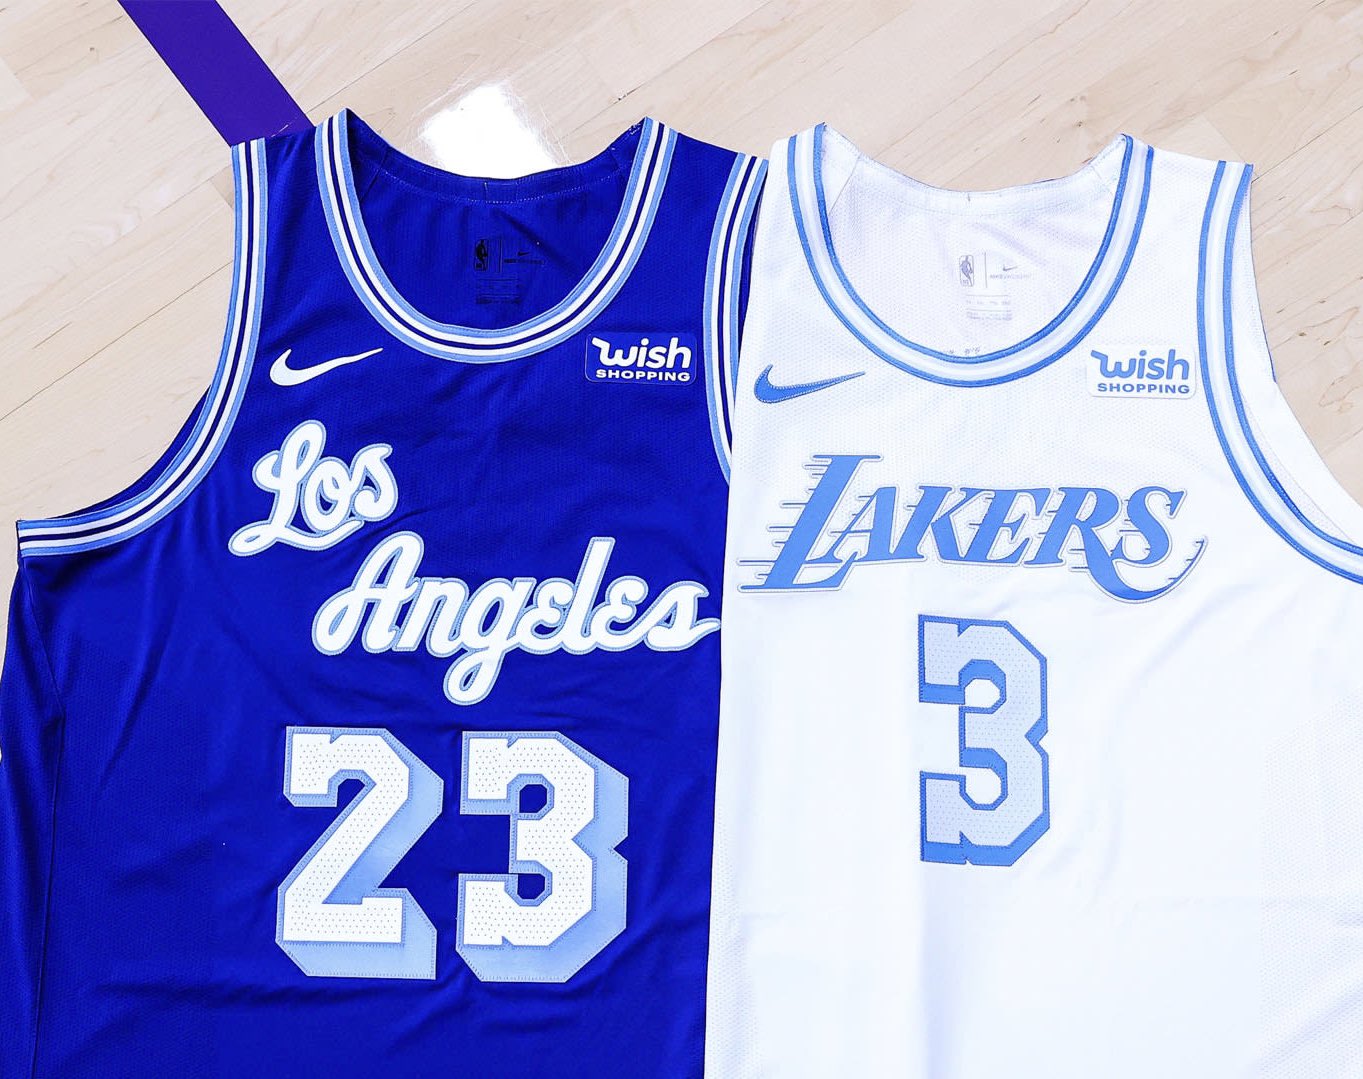 The Laker Files on Twitter: "The Lakers will debut their City Edition  Jerseys (white) on Christmas Day against the Mavericks 🔥 The Lakers will  also debut their Classic Edition Jerseys on December